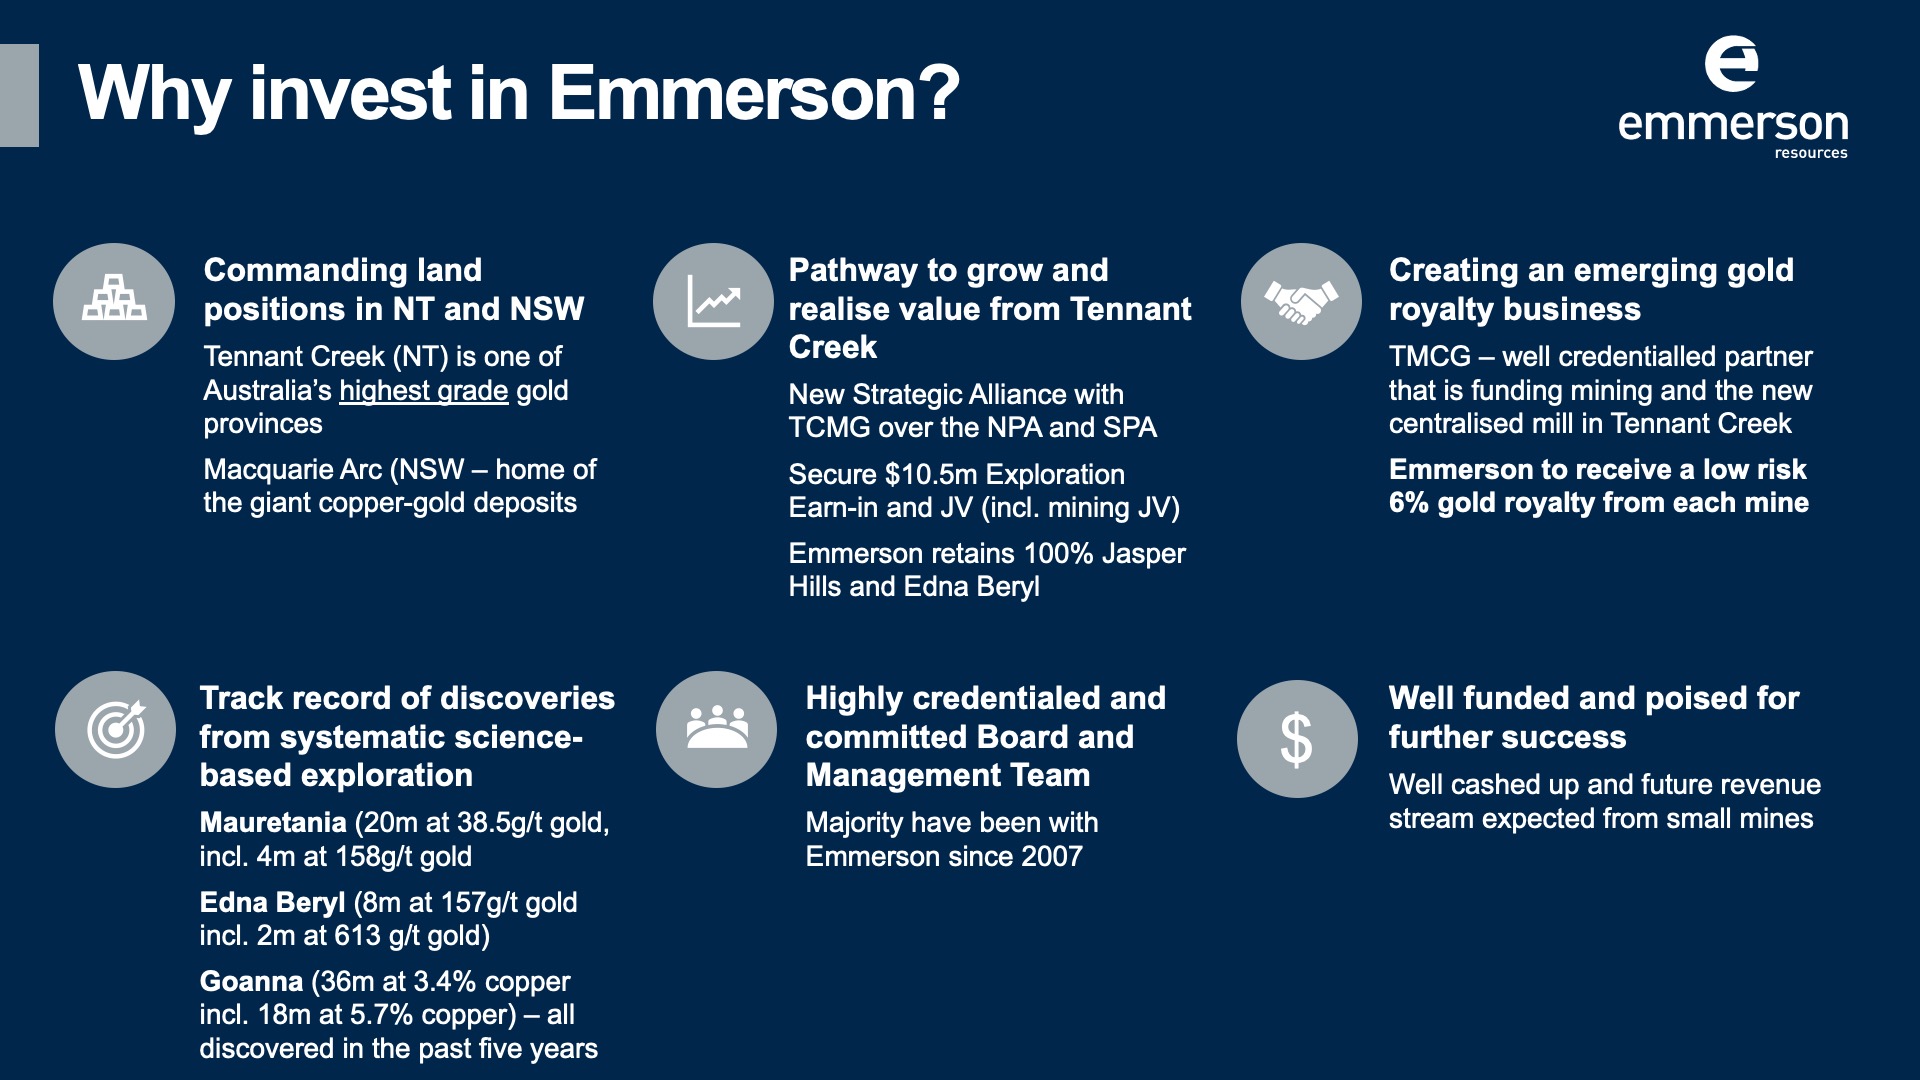 Why Invest in Emmerson